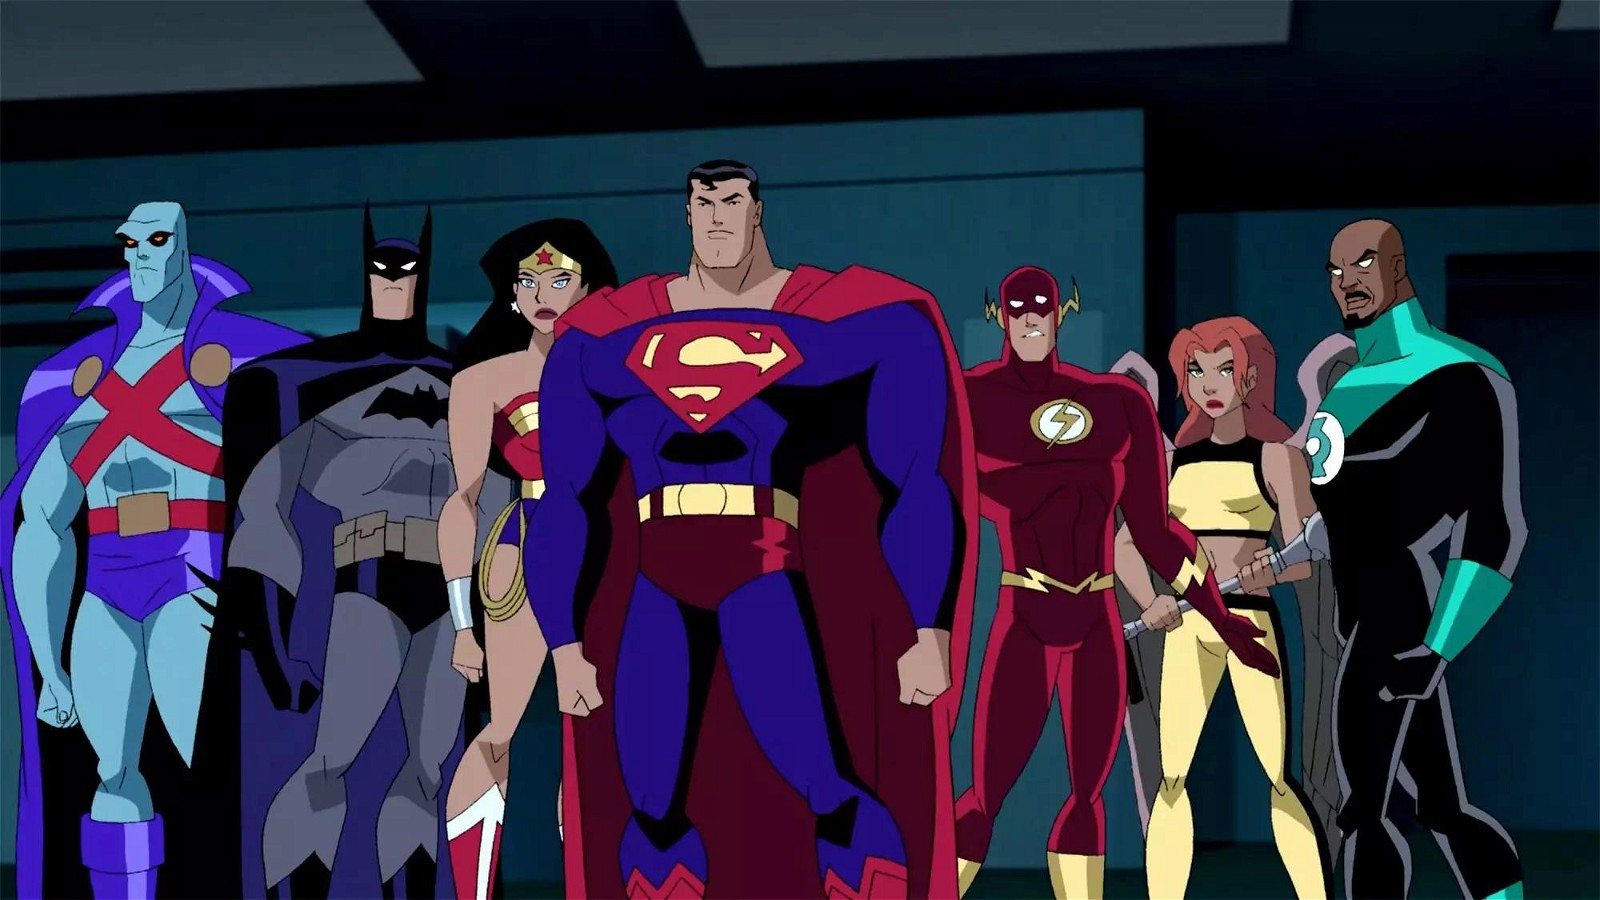 Bruce Timm loved making both Justice League and Justice League Unlimited